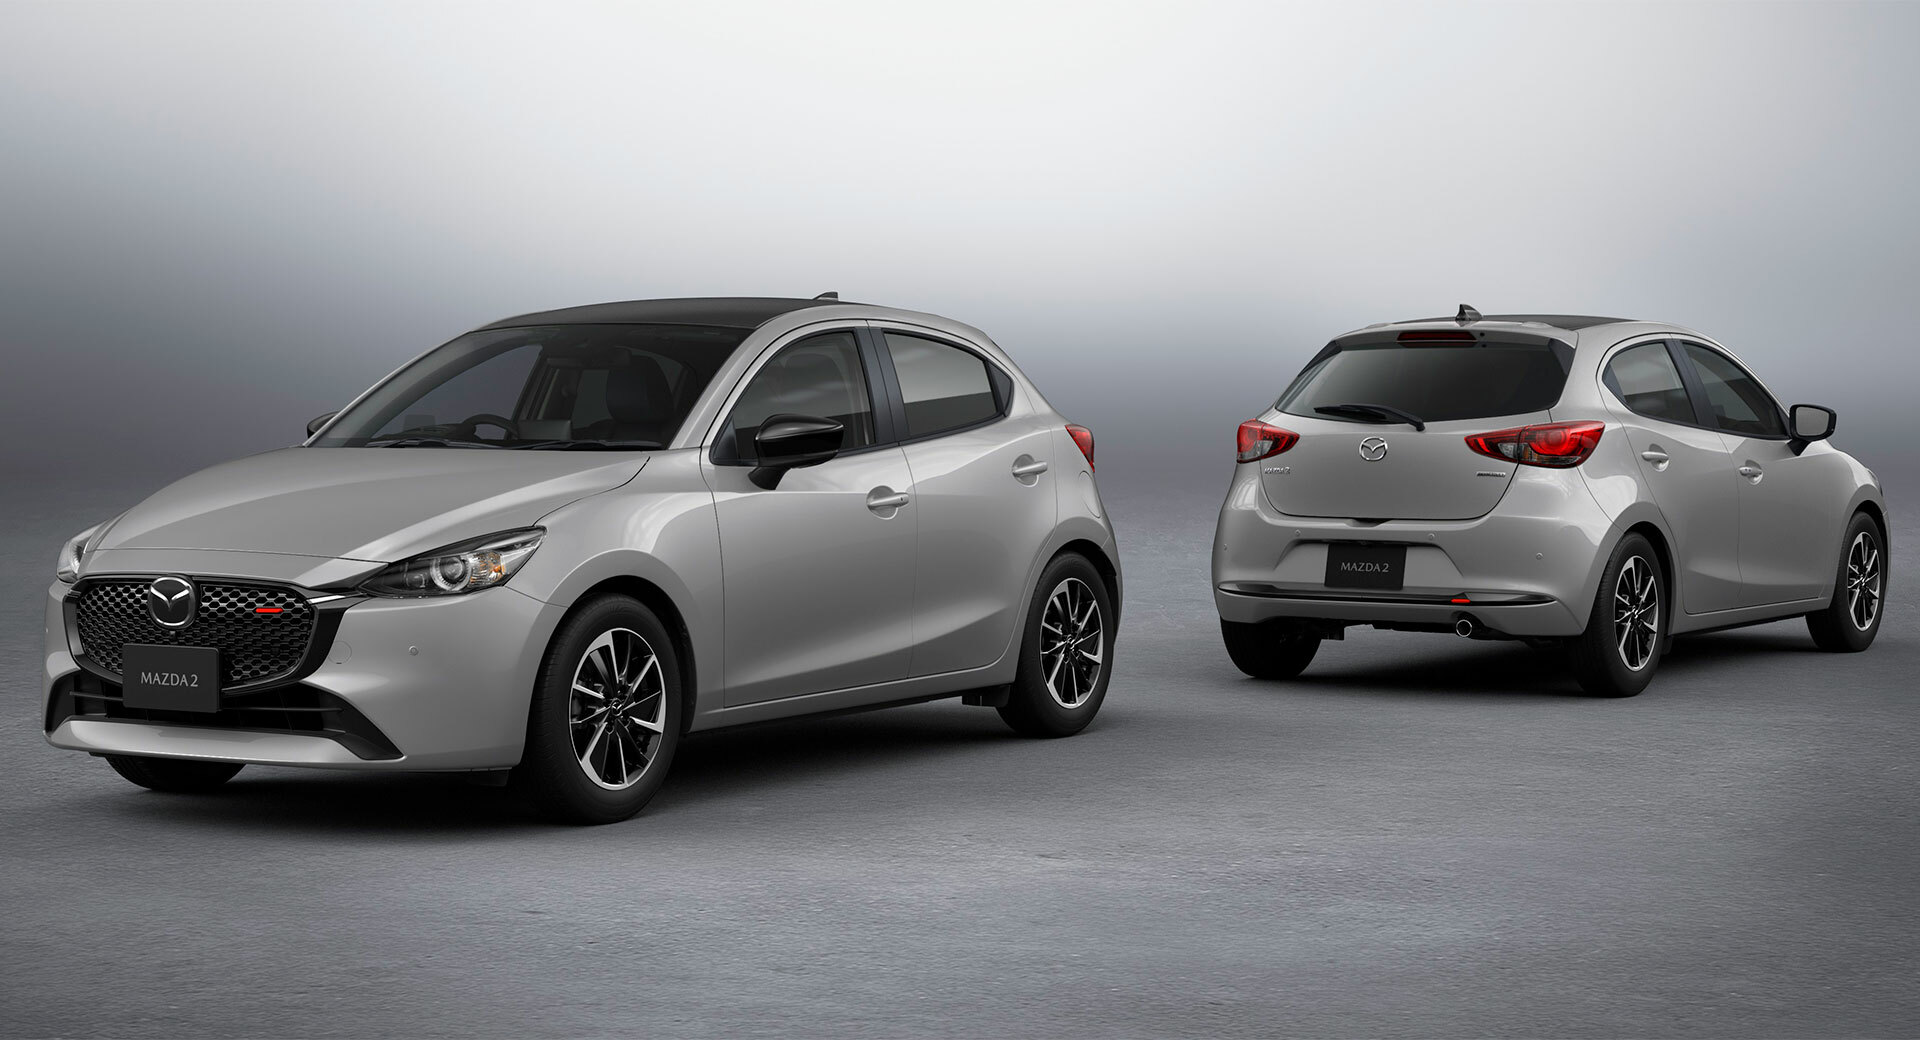 2024-mazda2-undergoes-a-subtle-facelift-for-city-car-buyers-carscoops